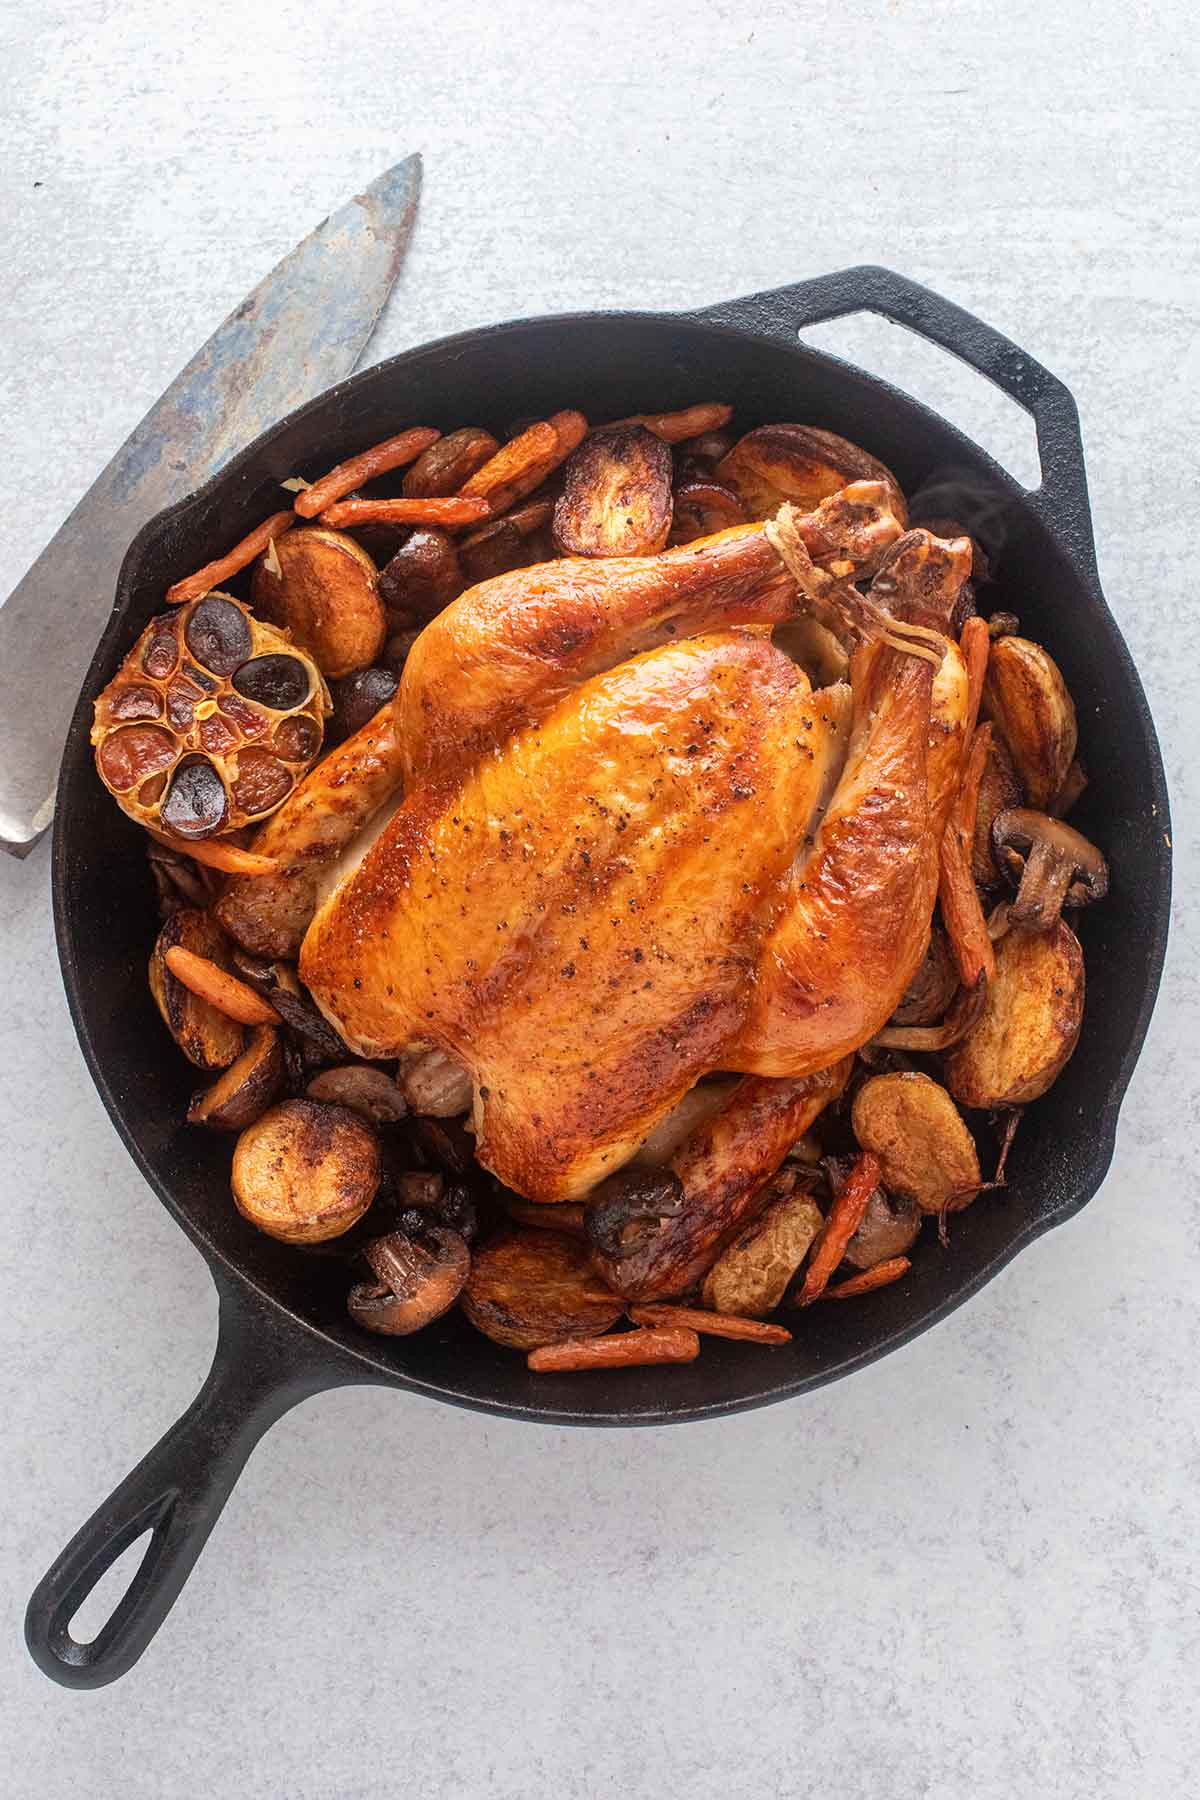 A skillet with David Leite's best brined roast chicken in a cast iron Dutch oven surrounded by potatoes, mushrooms, carrots, and a halved head of garlic.olden brown brined chicken with vegetables around it.